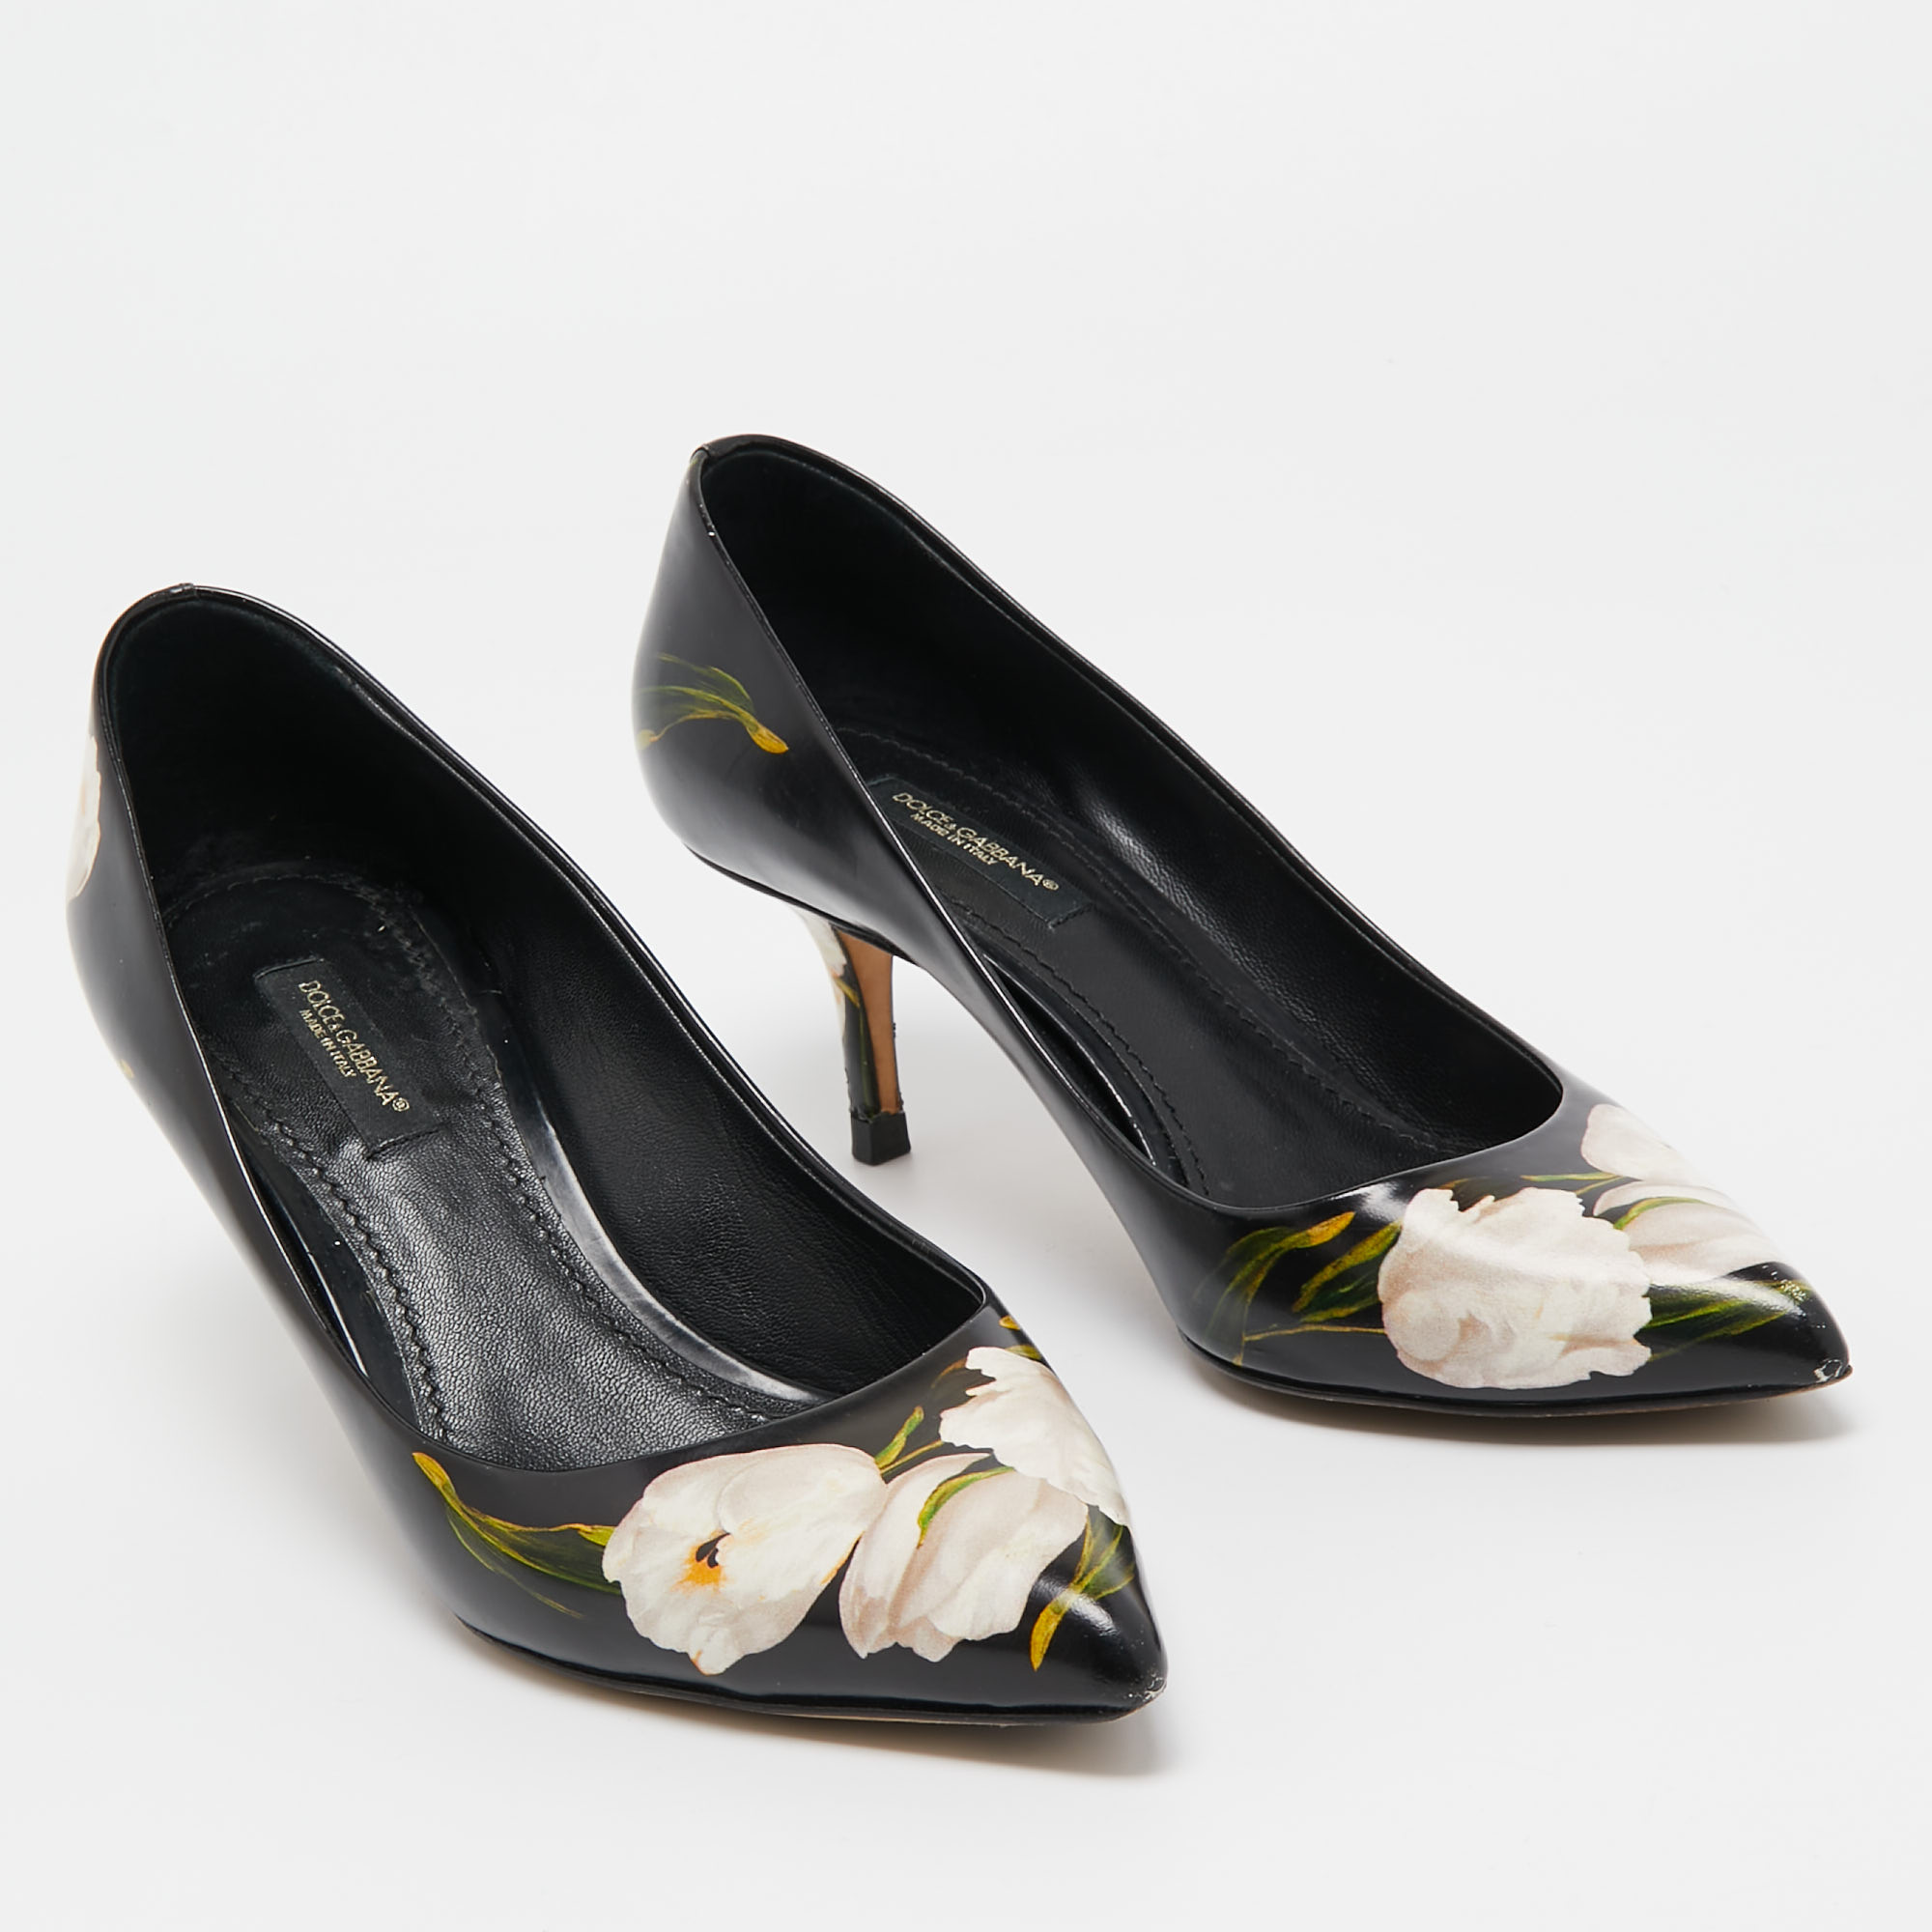 Dolce & Gabbana Black Floral Print Leather Pointed Toe Pumps Size 36